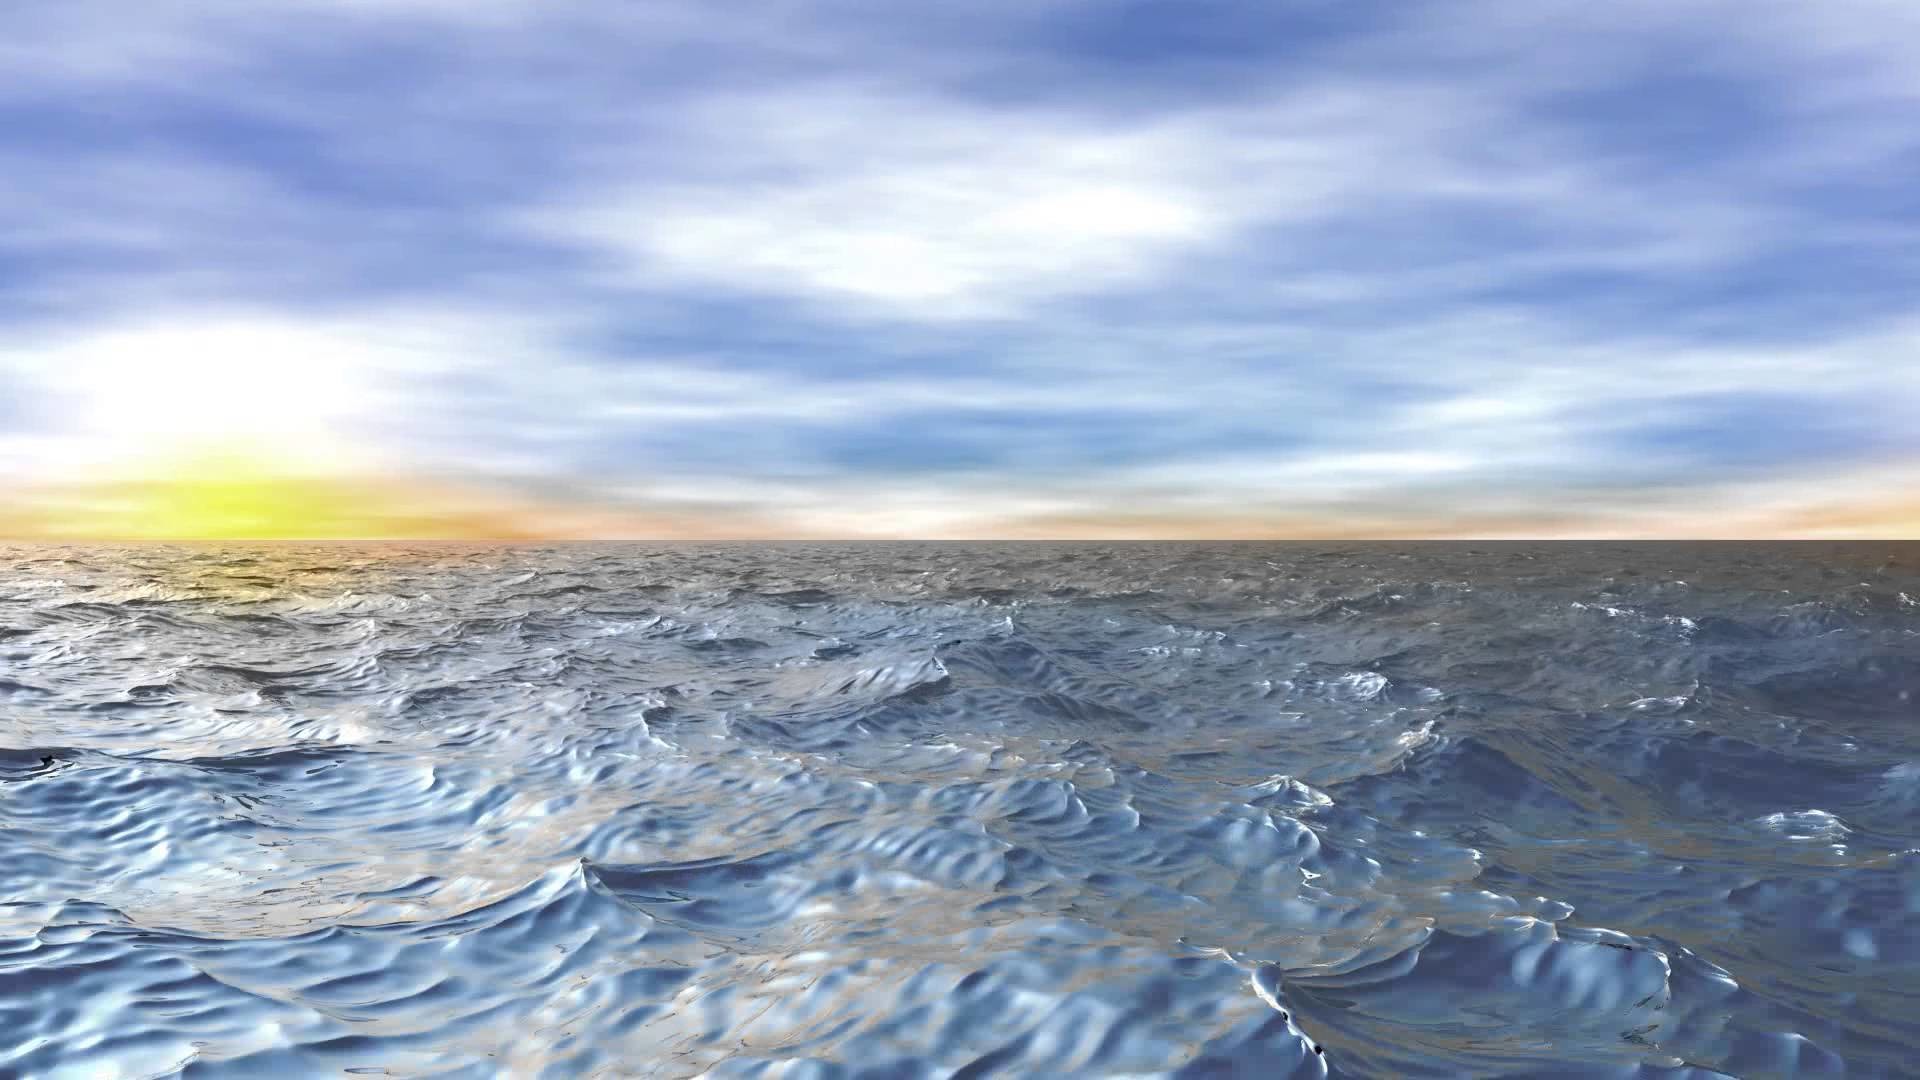 1920x1080 FREE HD video backgrounds – 3D animated ocean waves - fly over